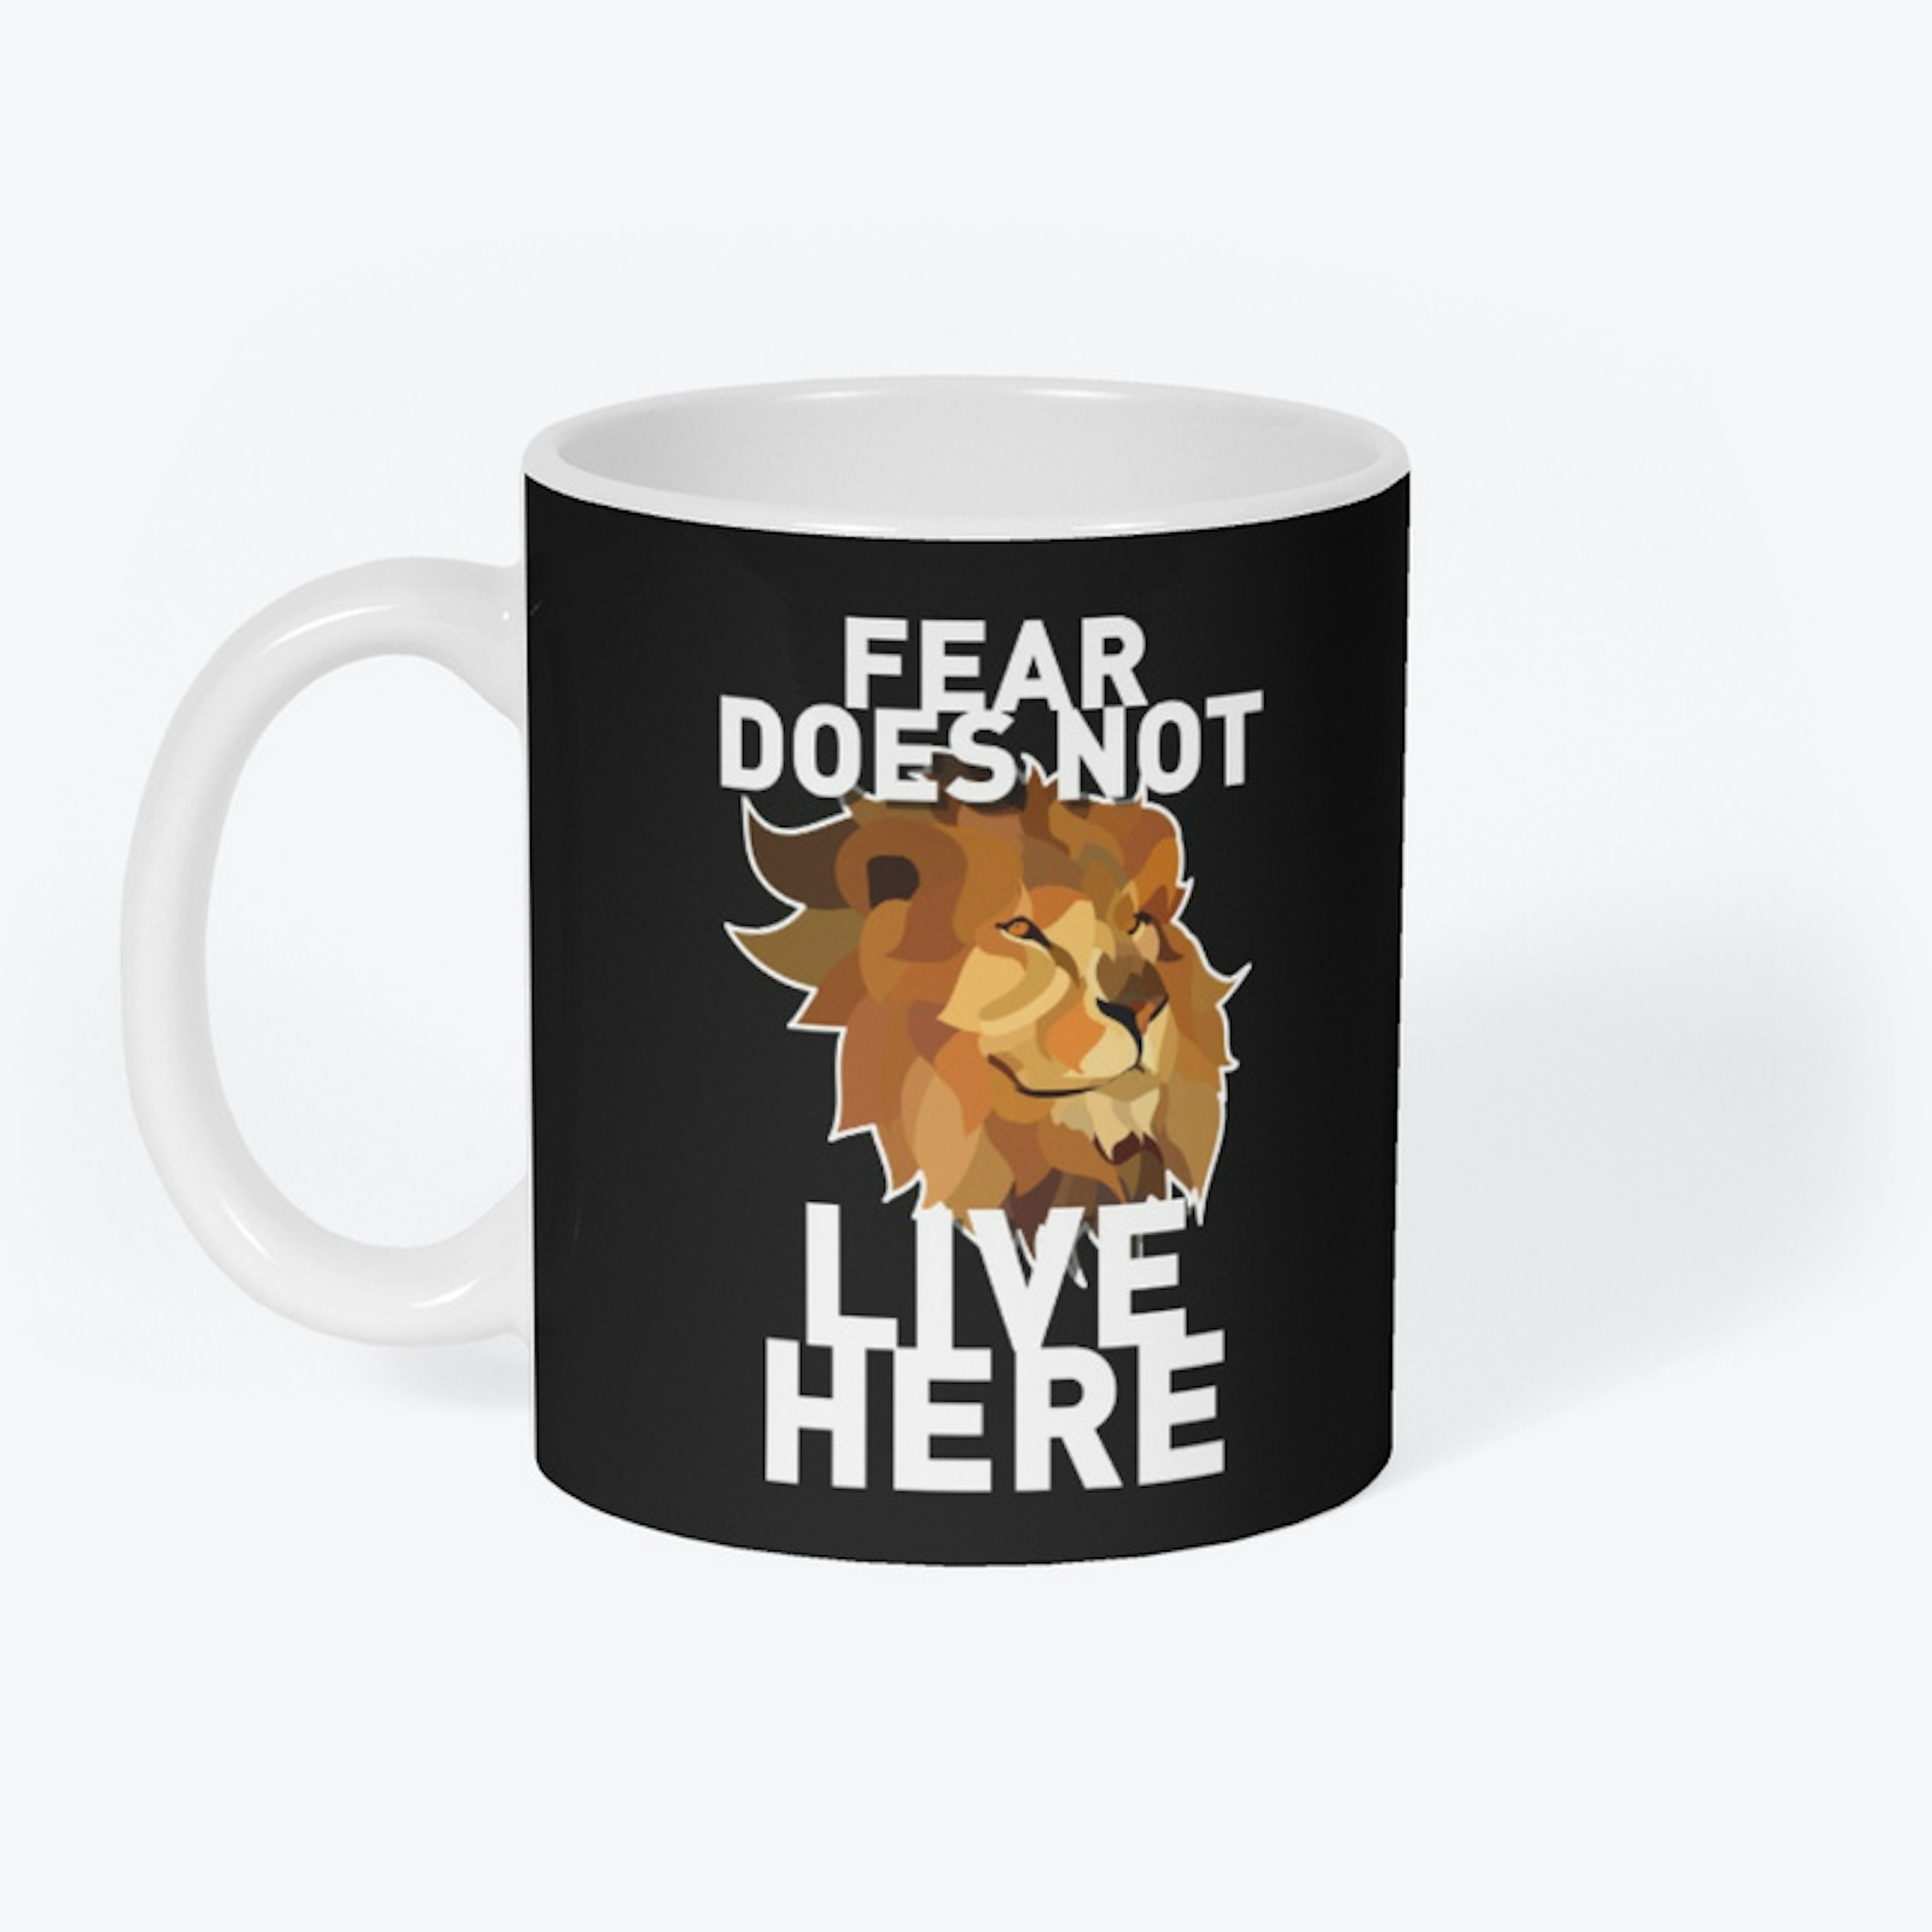 FEAR DOES NOT LIVE HERE